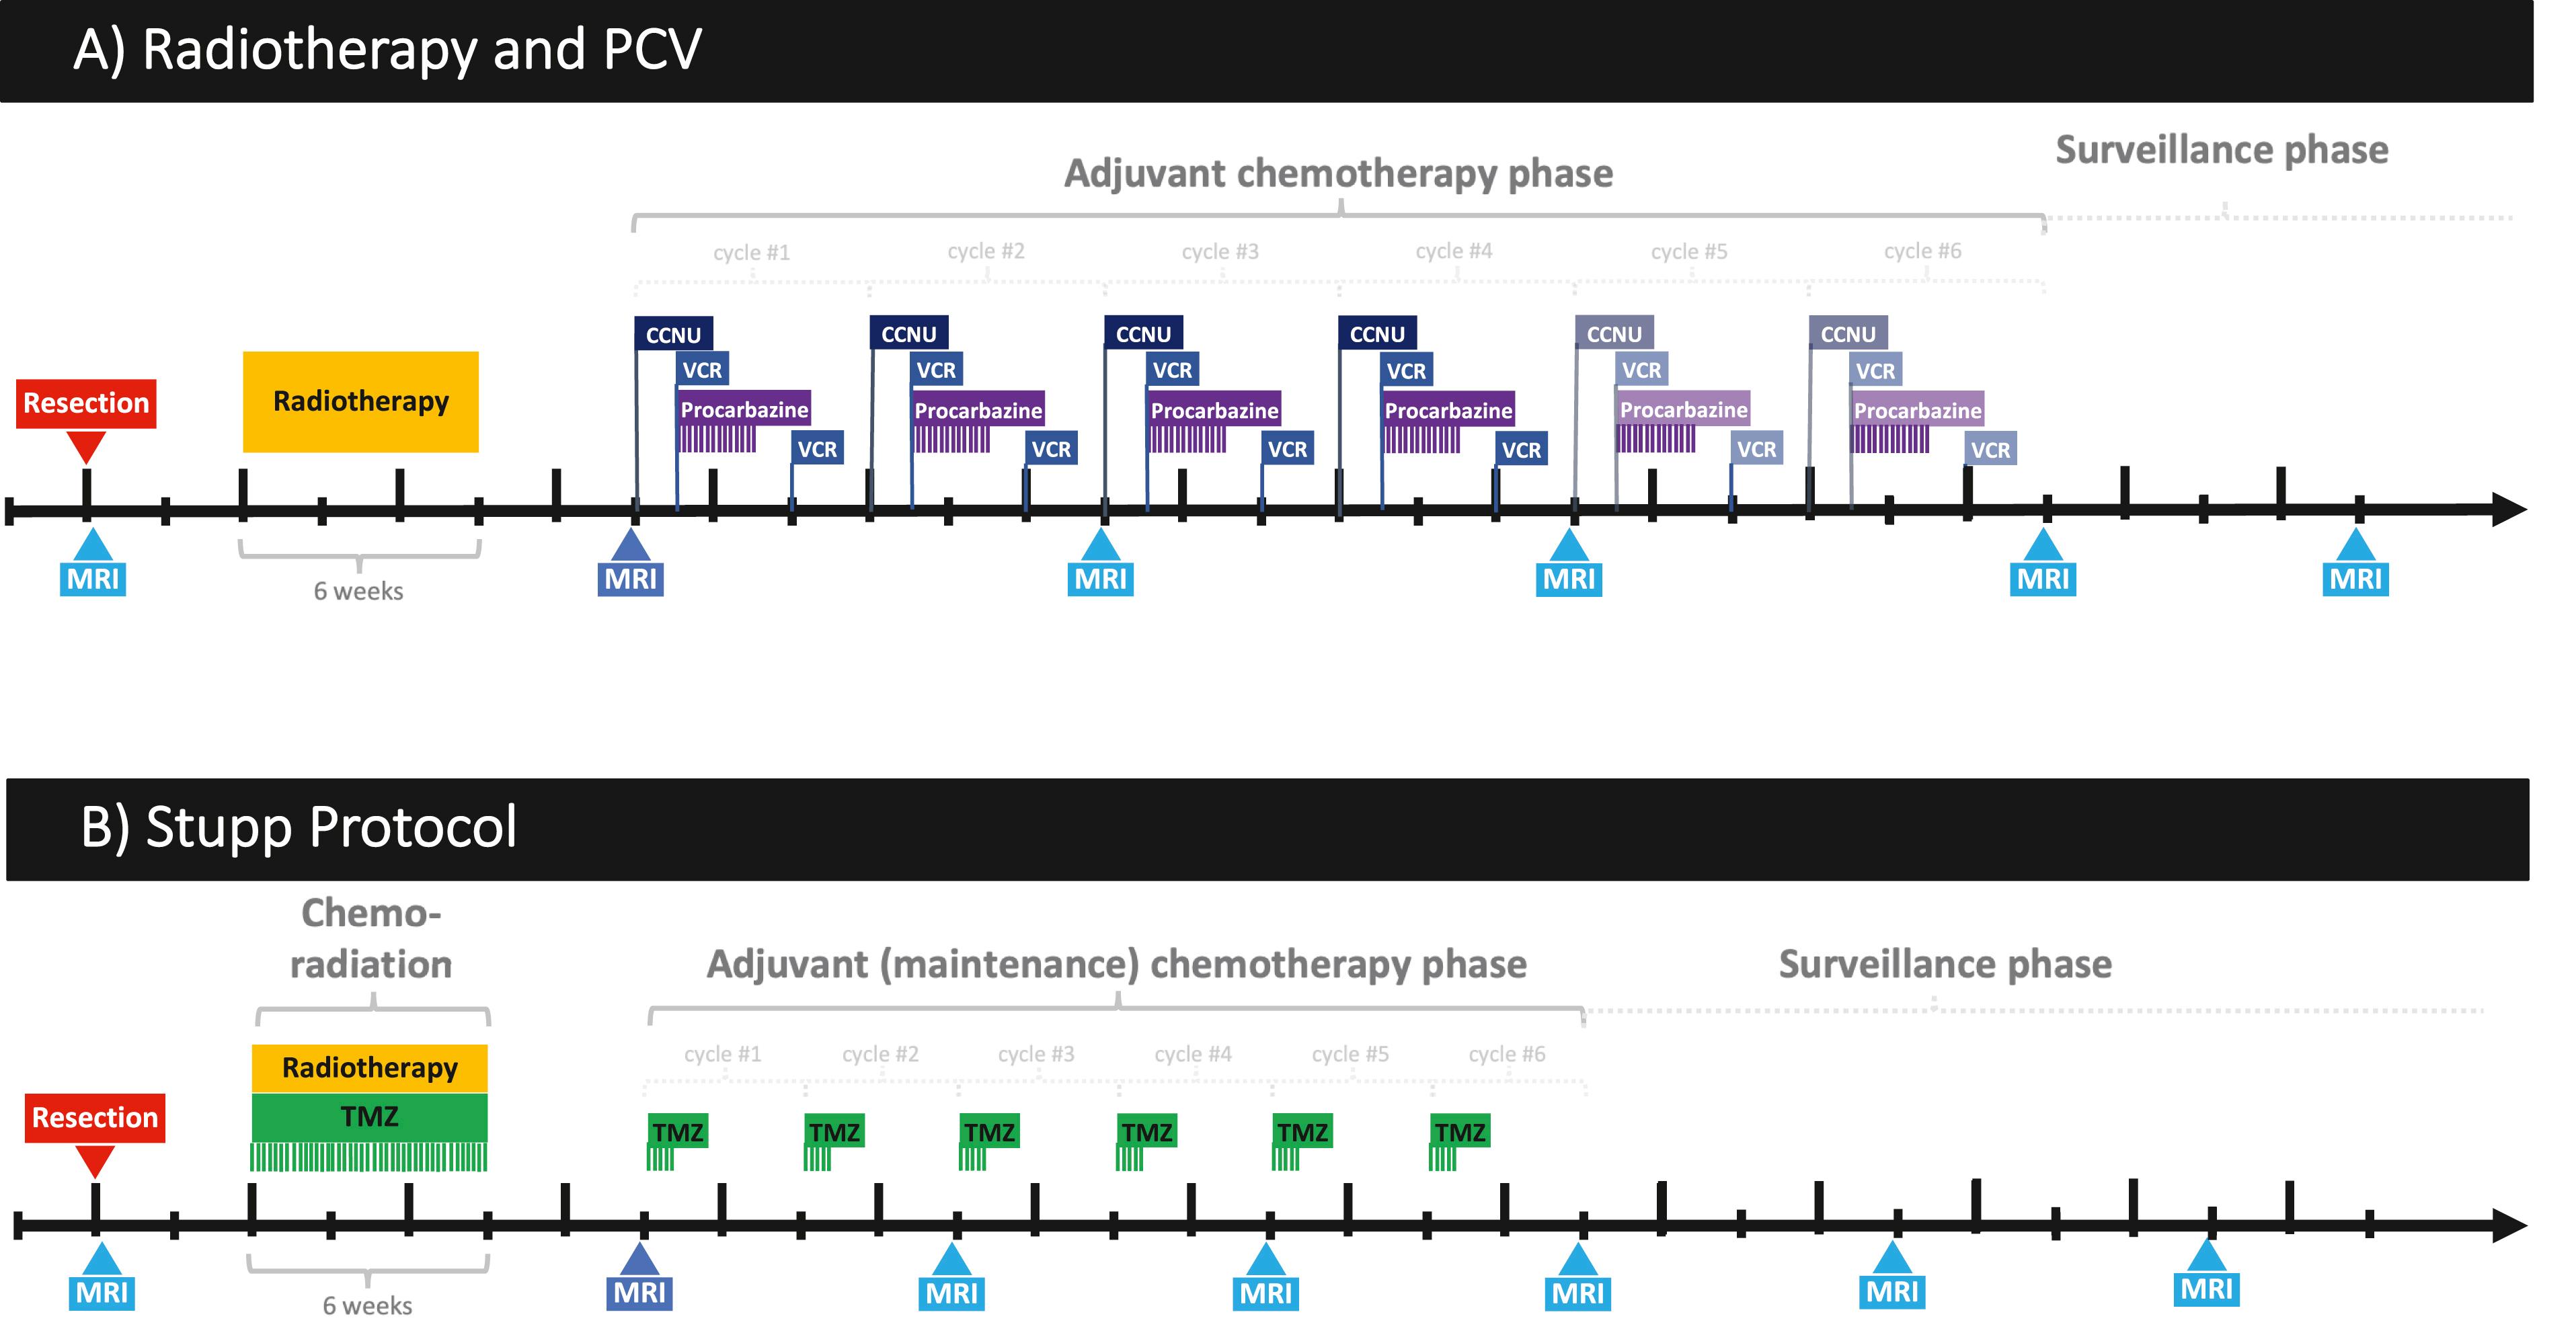 Fig. 12.3, (A) illustrates the timeline of the PCV protocol with radiotherapy followed by 6-week cycles of CCNU on day 1, vincristine (VCR) on day 8 and 29, and daily procarbazine from day 8 through day 21. (B) illustrates the Stupp protocol with 6 weeks of combined radiotherapy and low-dose temozolomide (TMZ) followed by 4-week cycles of standard dose temozolomide given day 1 through day 5.